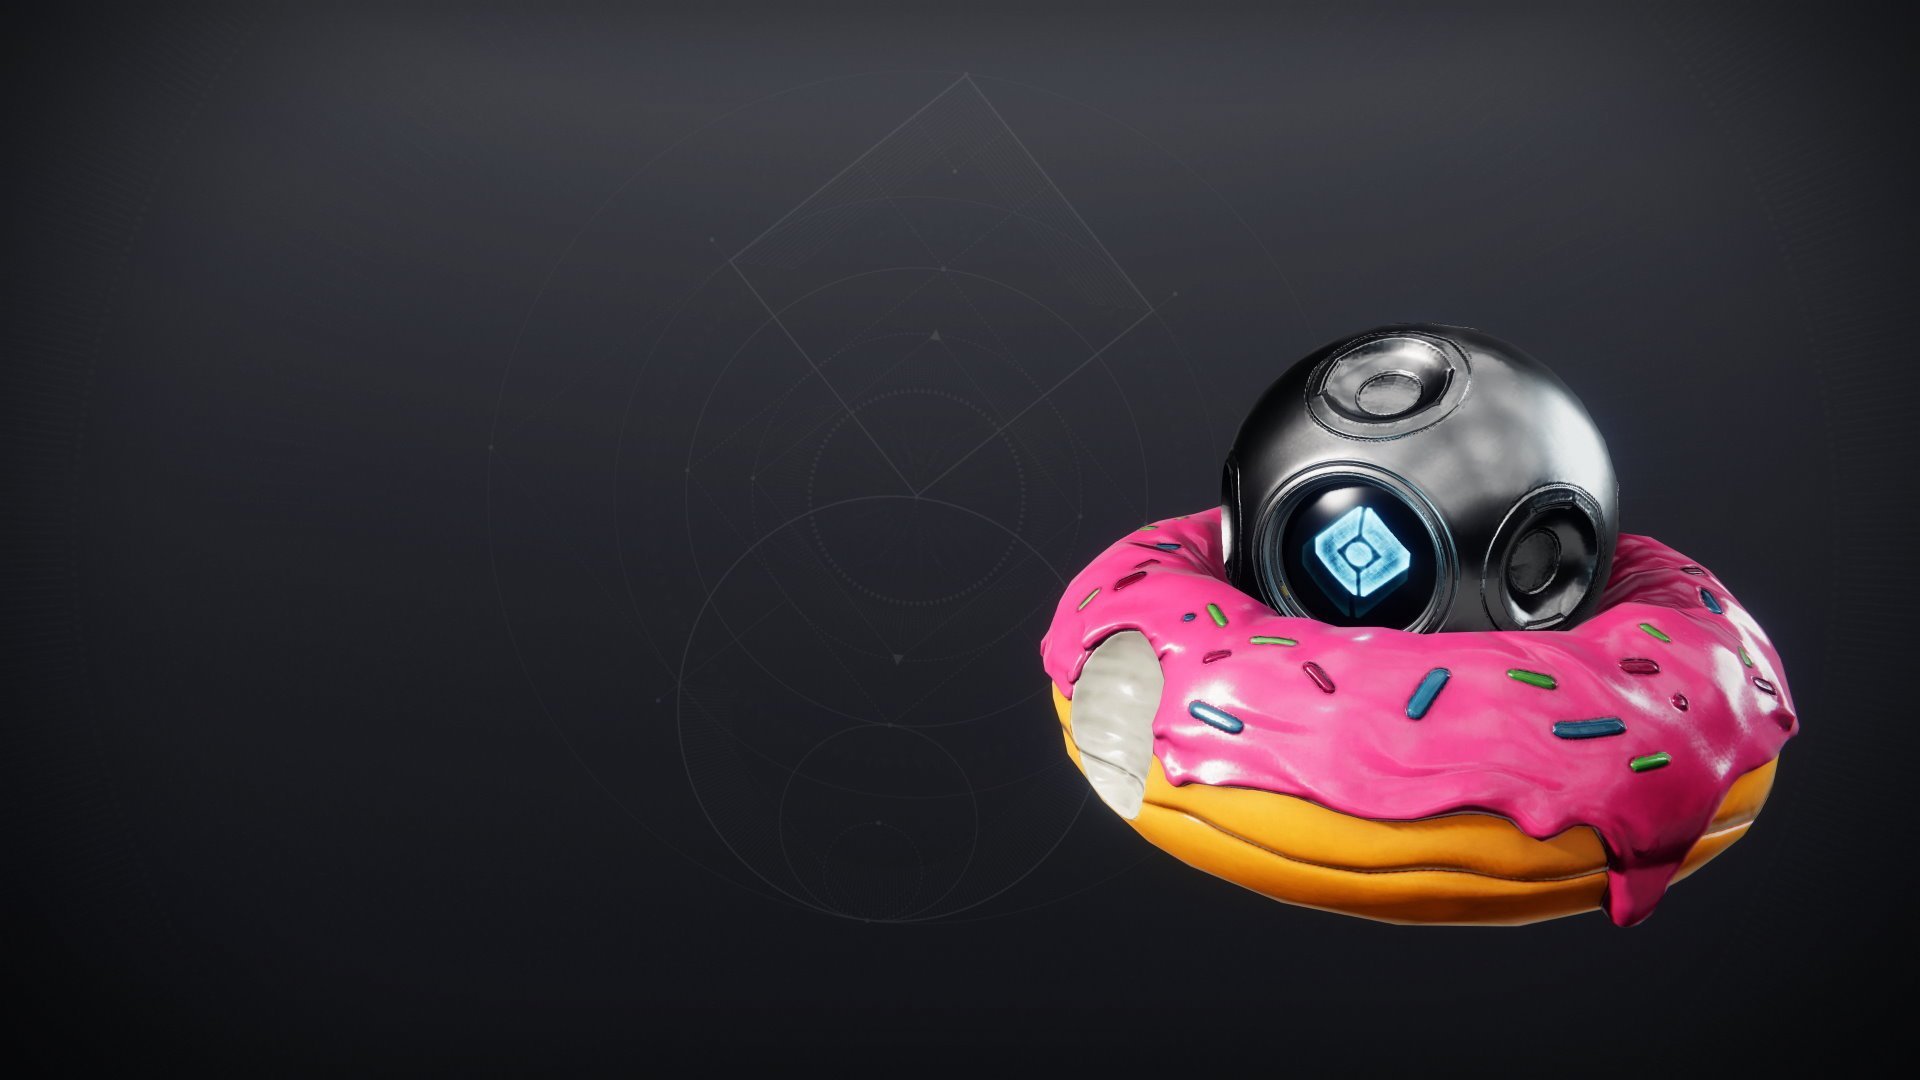 An in-game render of the Sweet Sprinkles Shell.